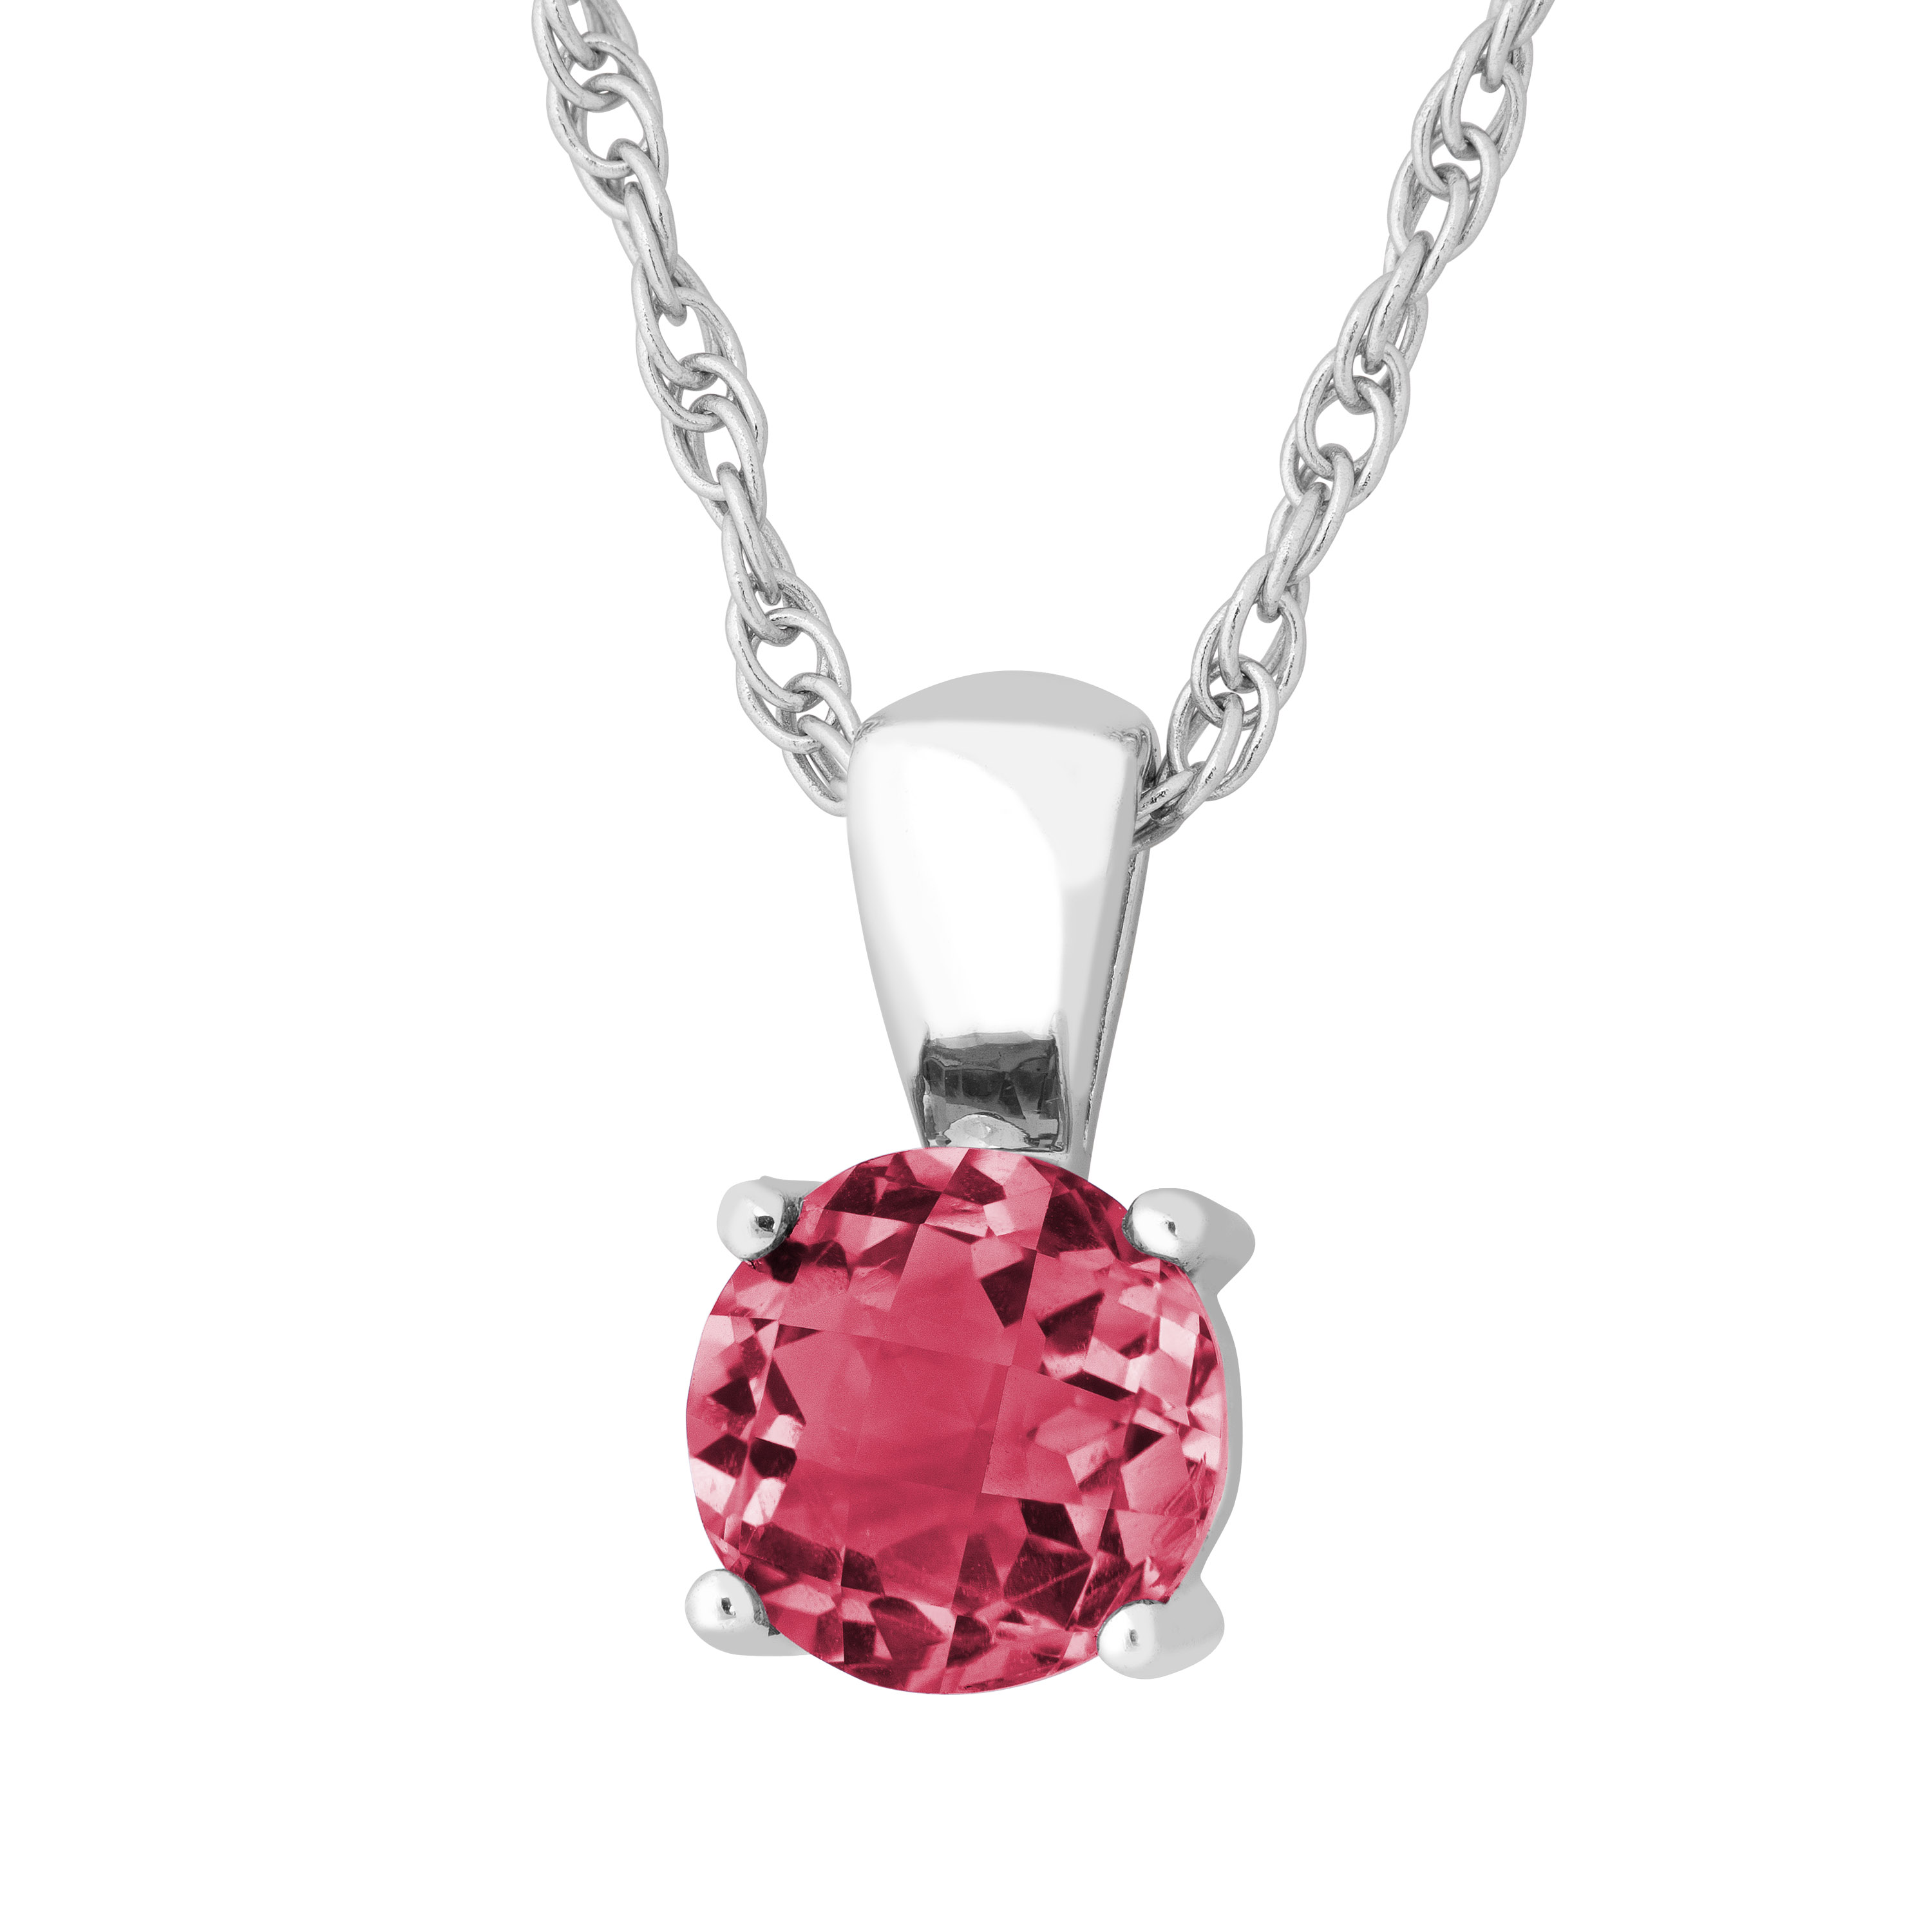 Created Round Ruby Pendant Necklace, Rhodium Plated Sterling Silver